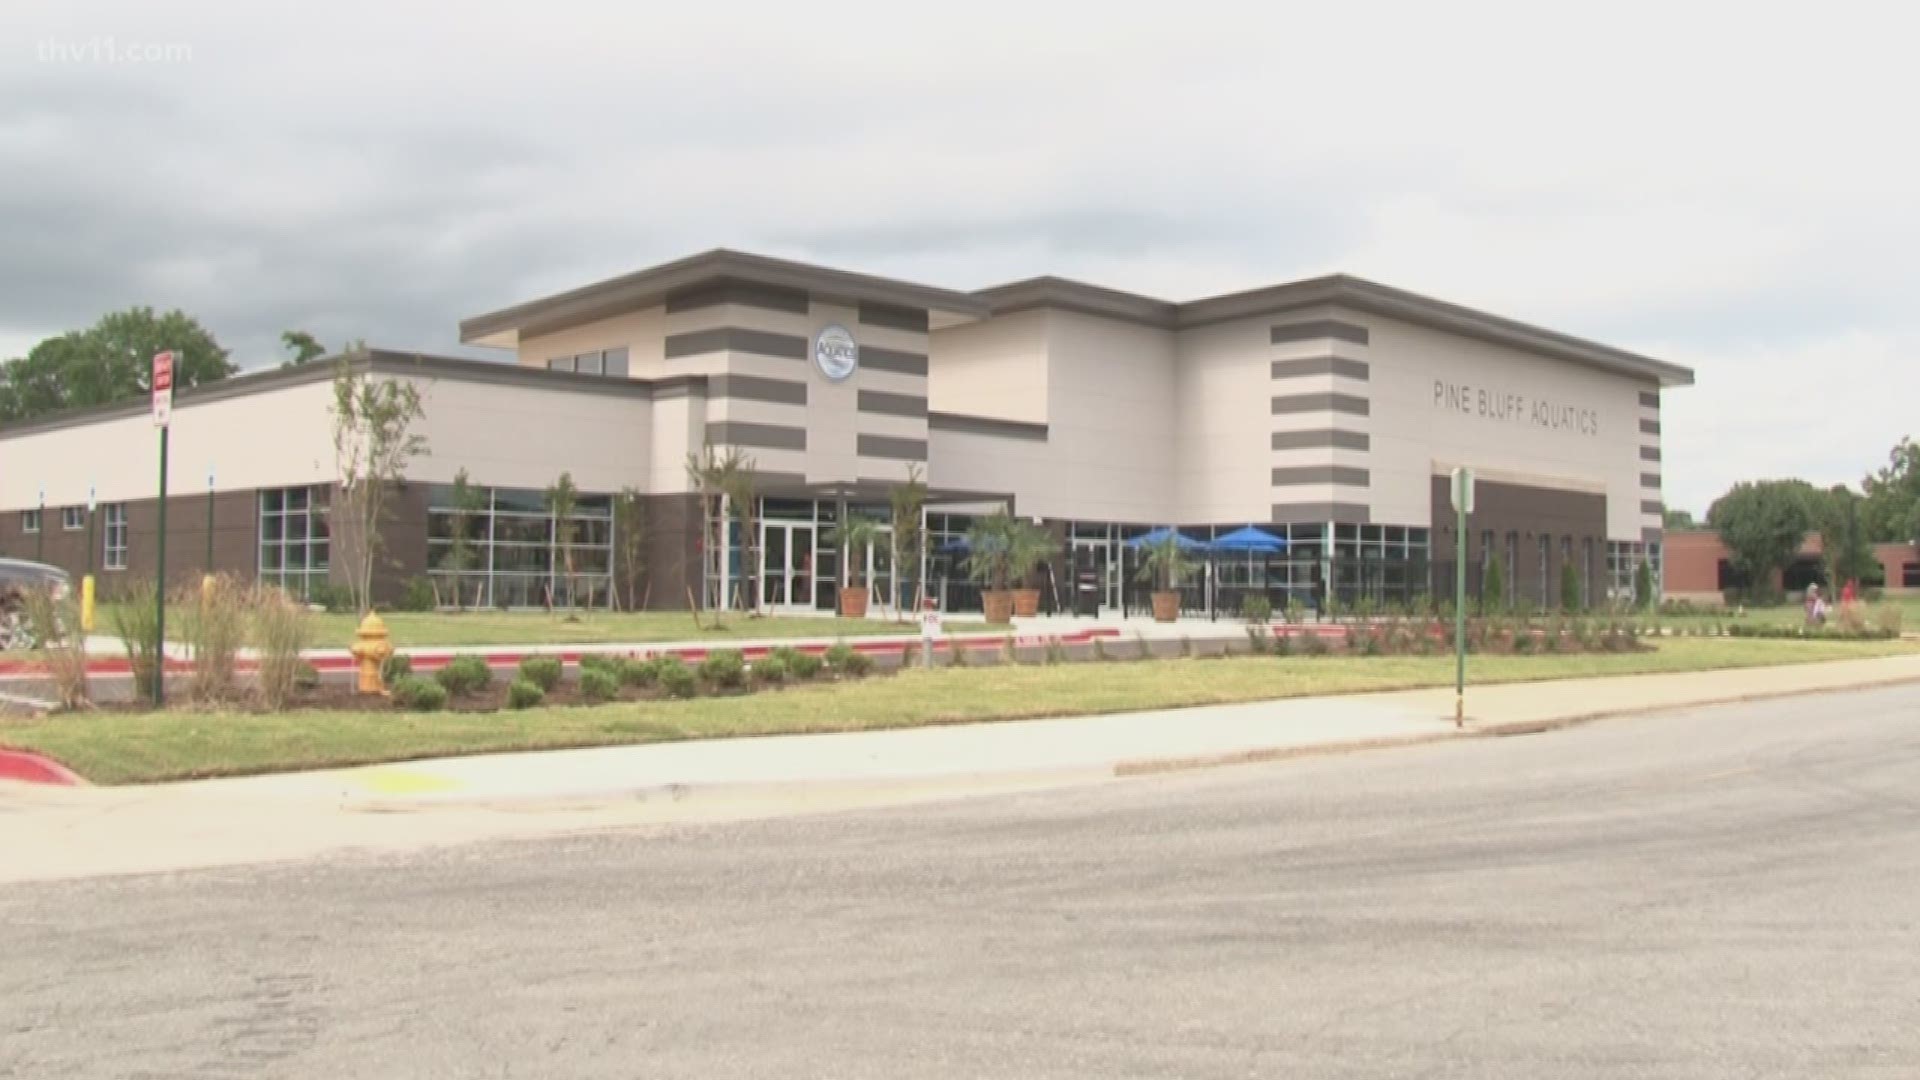 People in Pine Bluff will have a new way to cool off this summer. The city's long-awaited aquatic center is officially open.